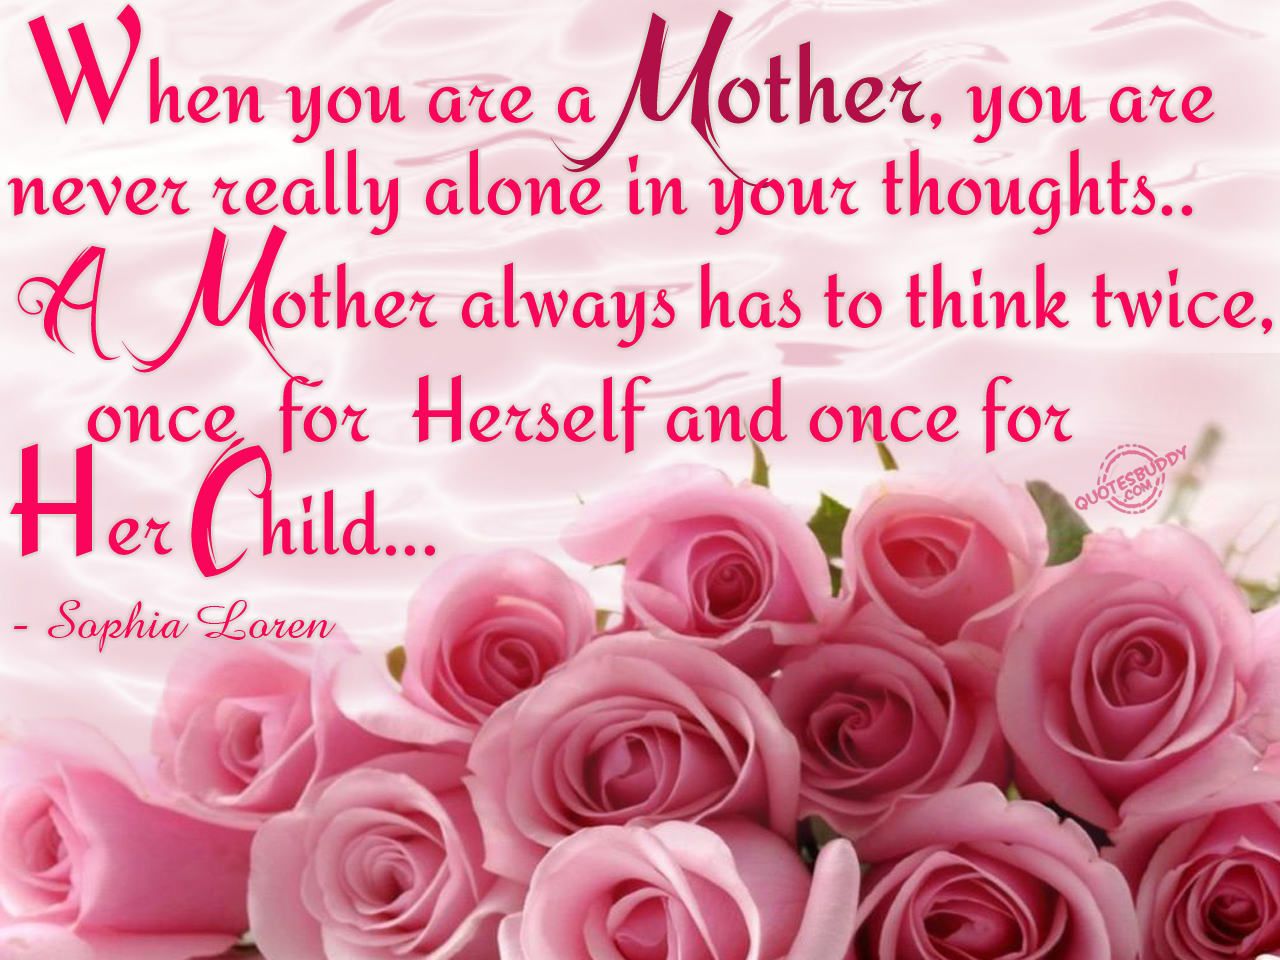 Adorable Quotes About Mothers